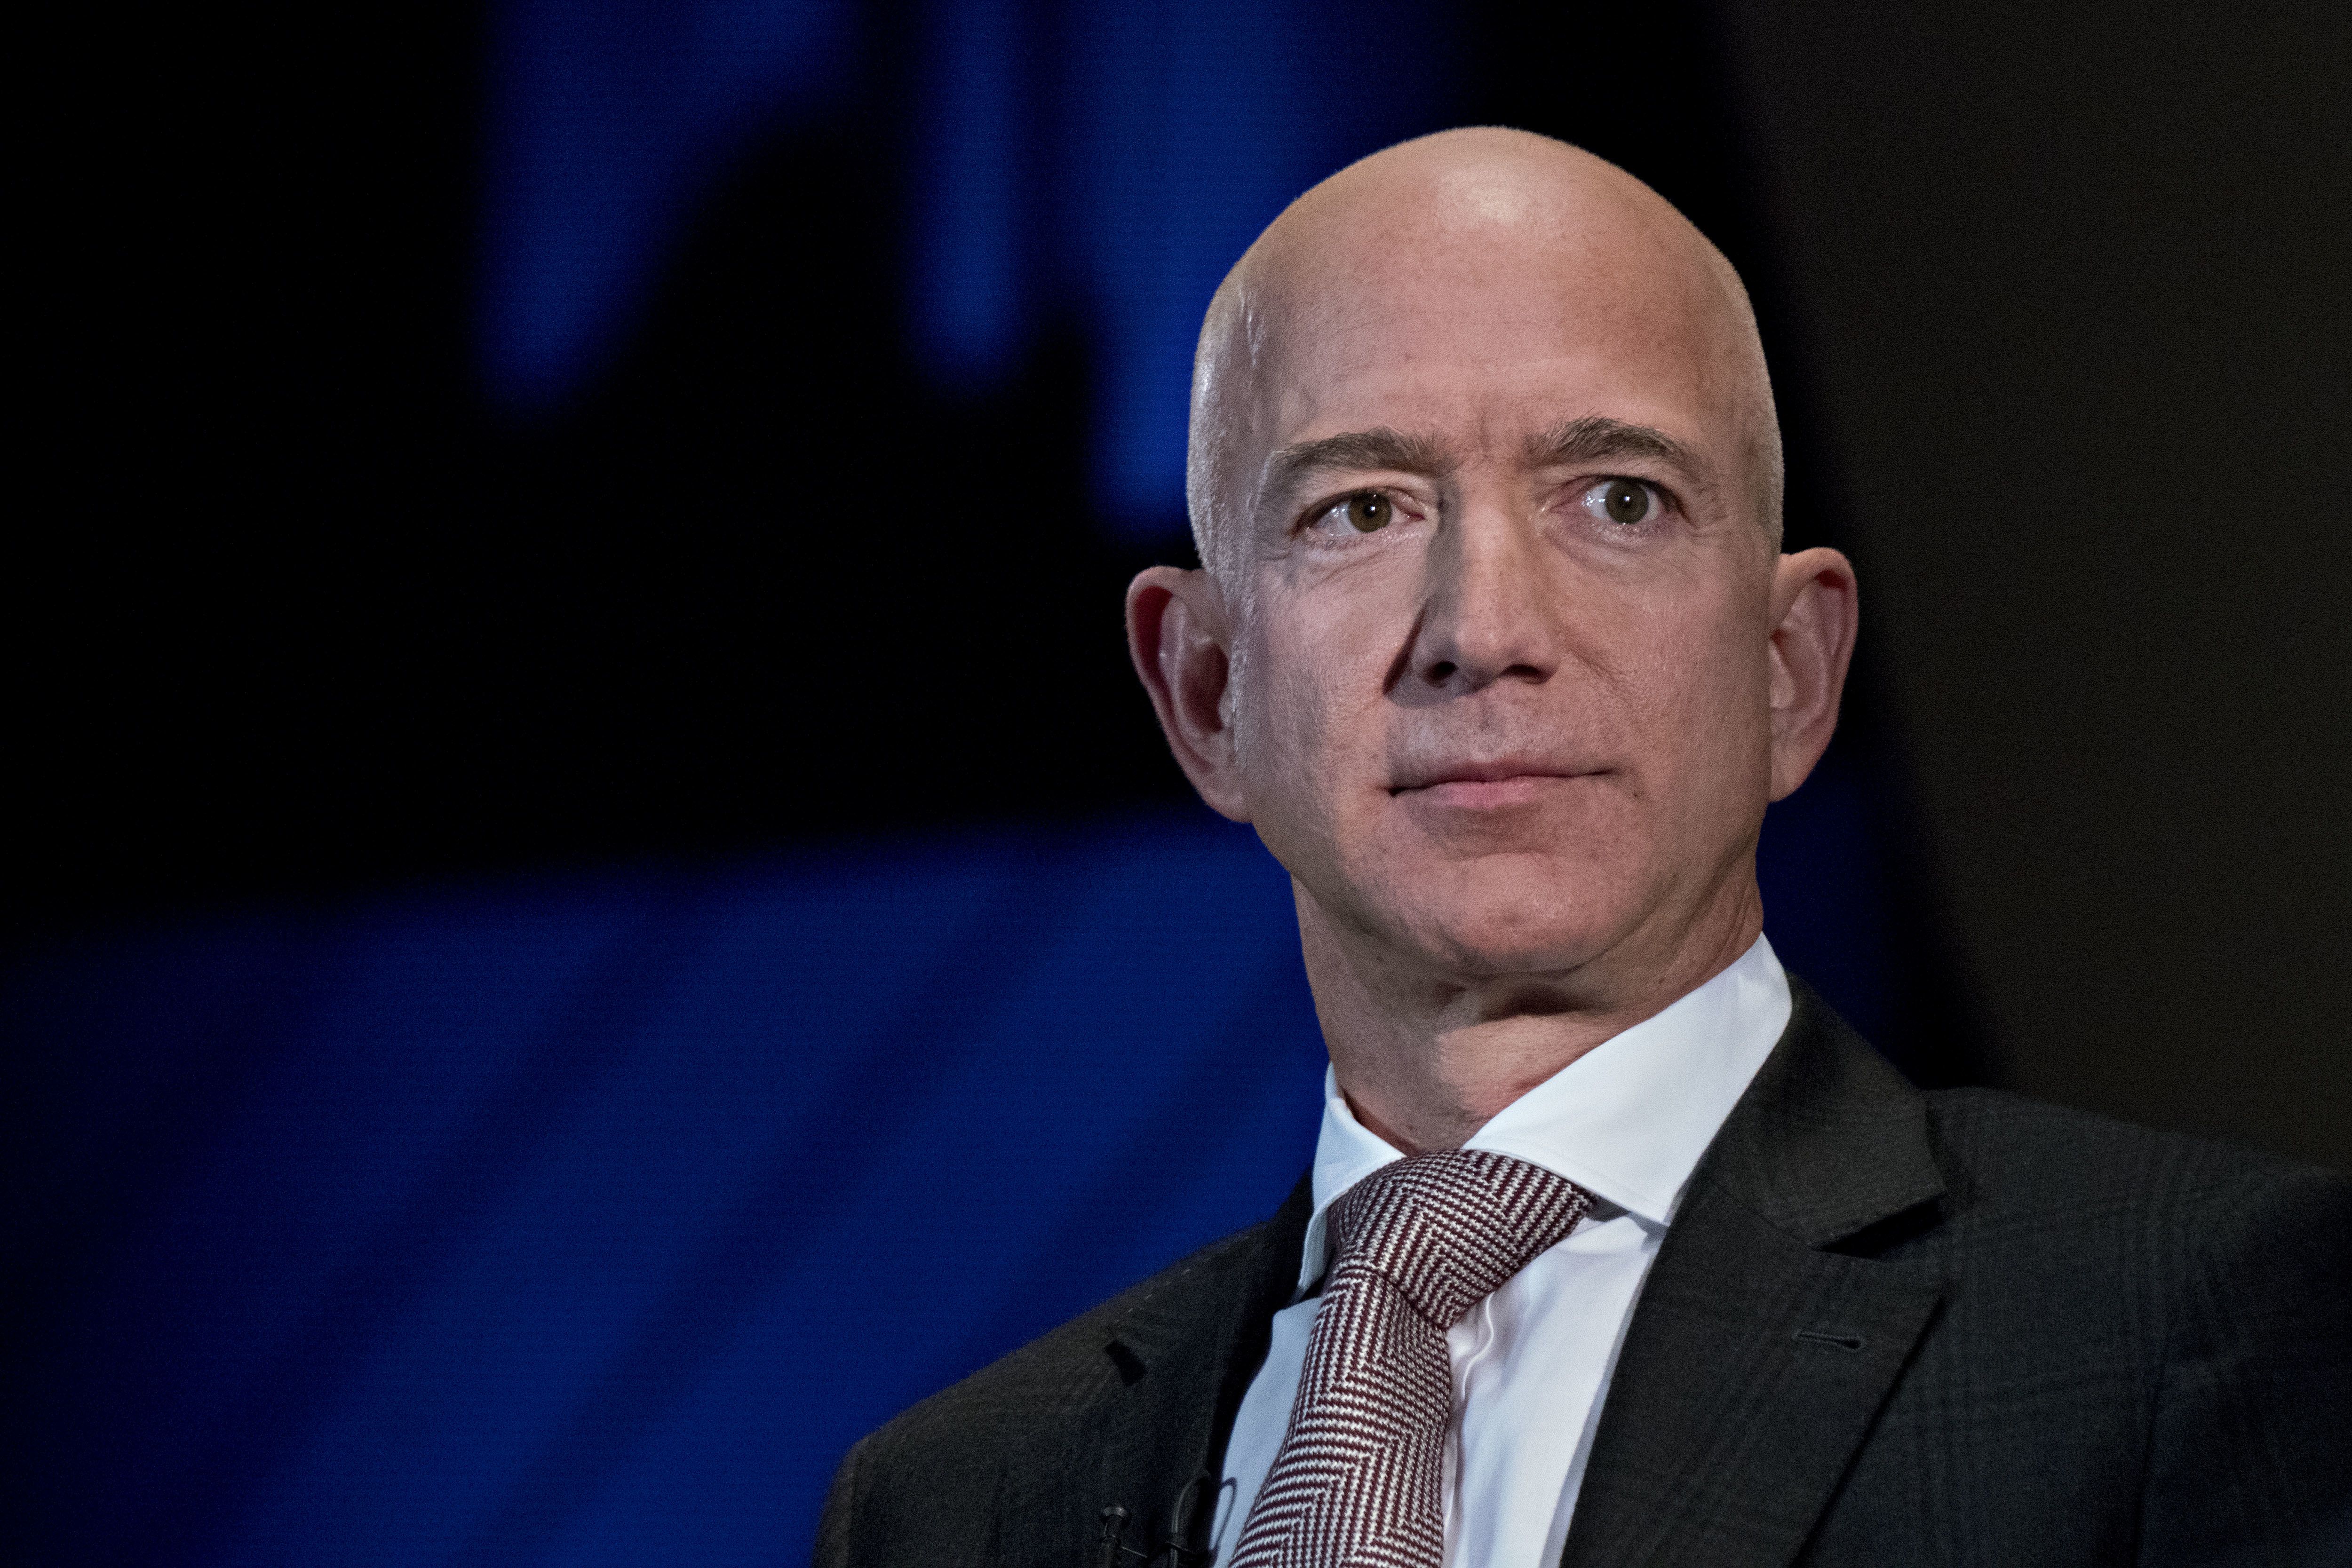 Jeff Bezos says compromising with coworkers is actually a bad idea